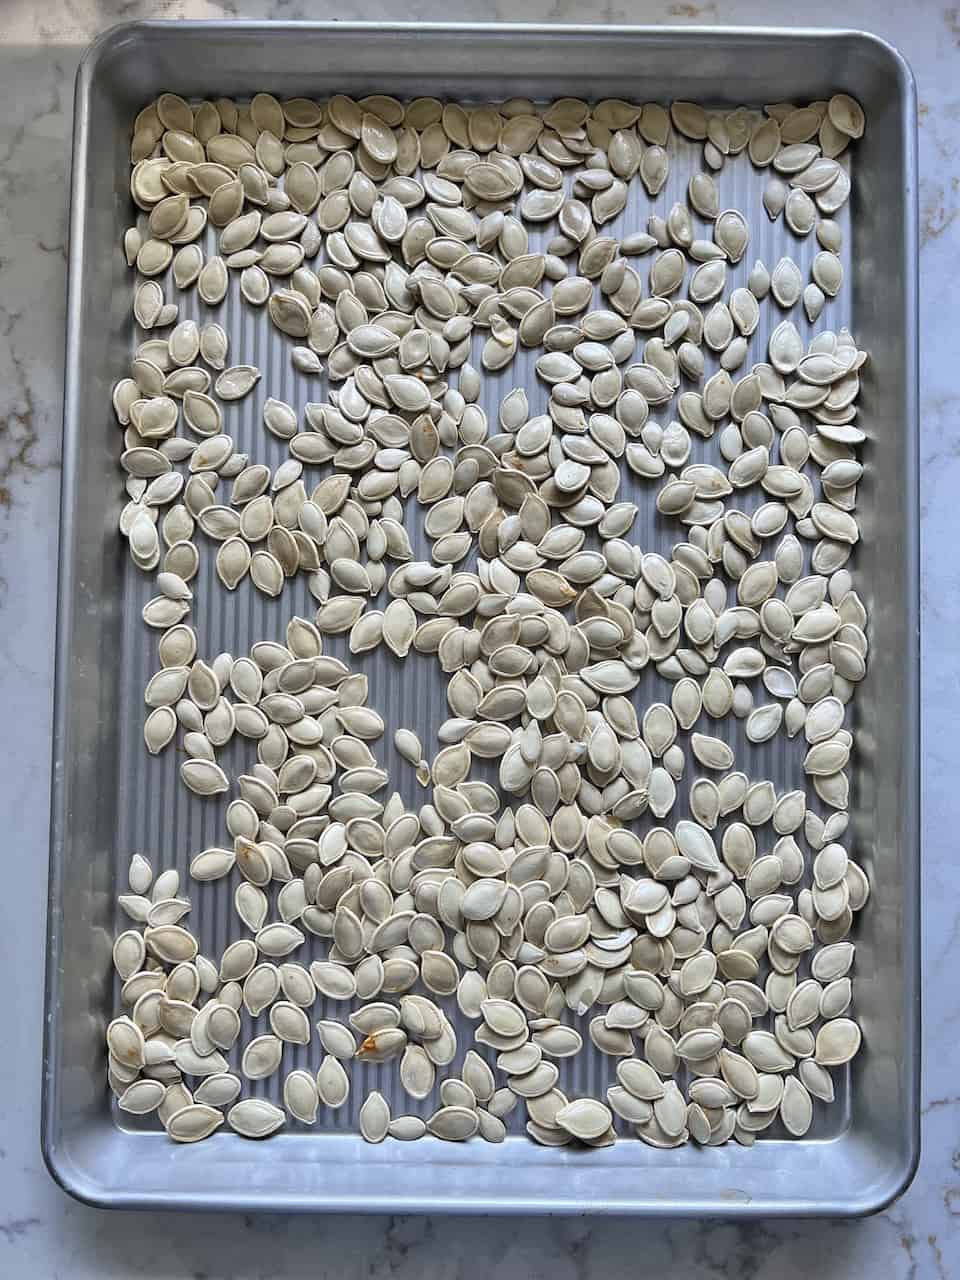 unbaked roasted spicy pumpkin seeds on a tray